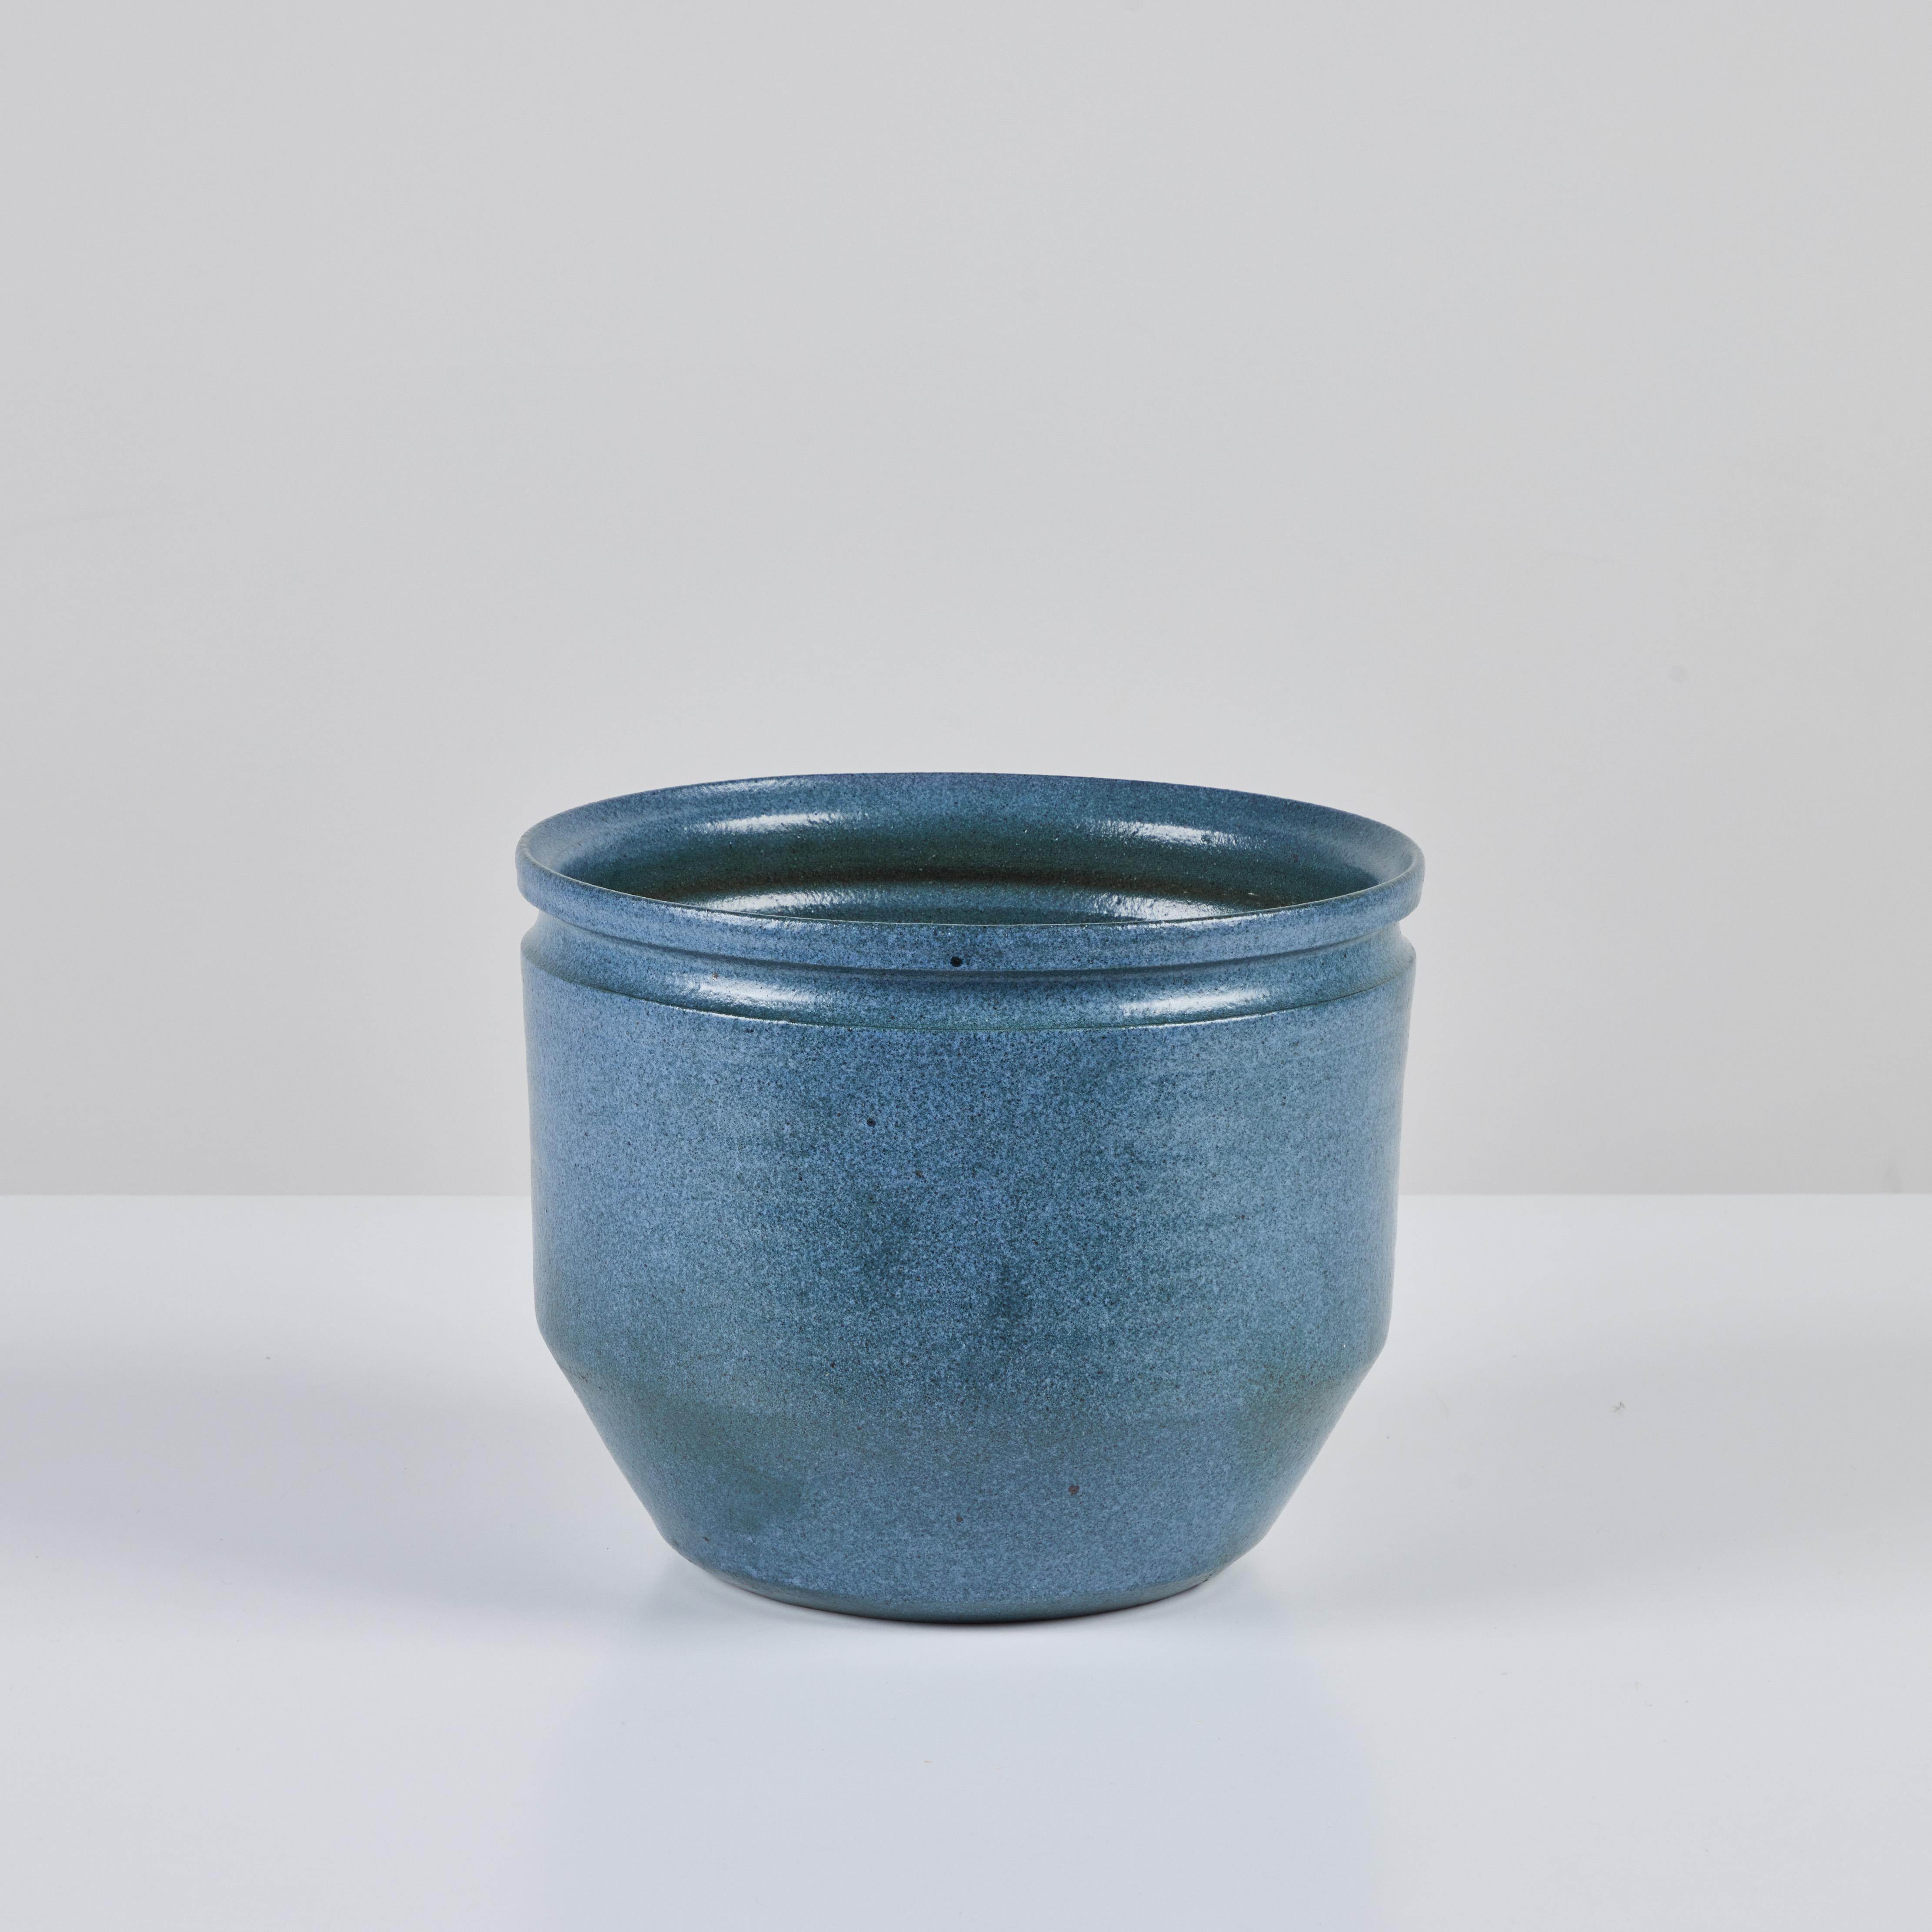 Ceramic David Cressey and Robert Maxwell Blue Speckle Glazed Planter for Earthgender